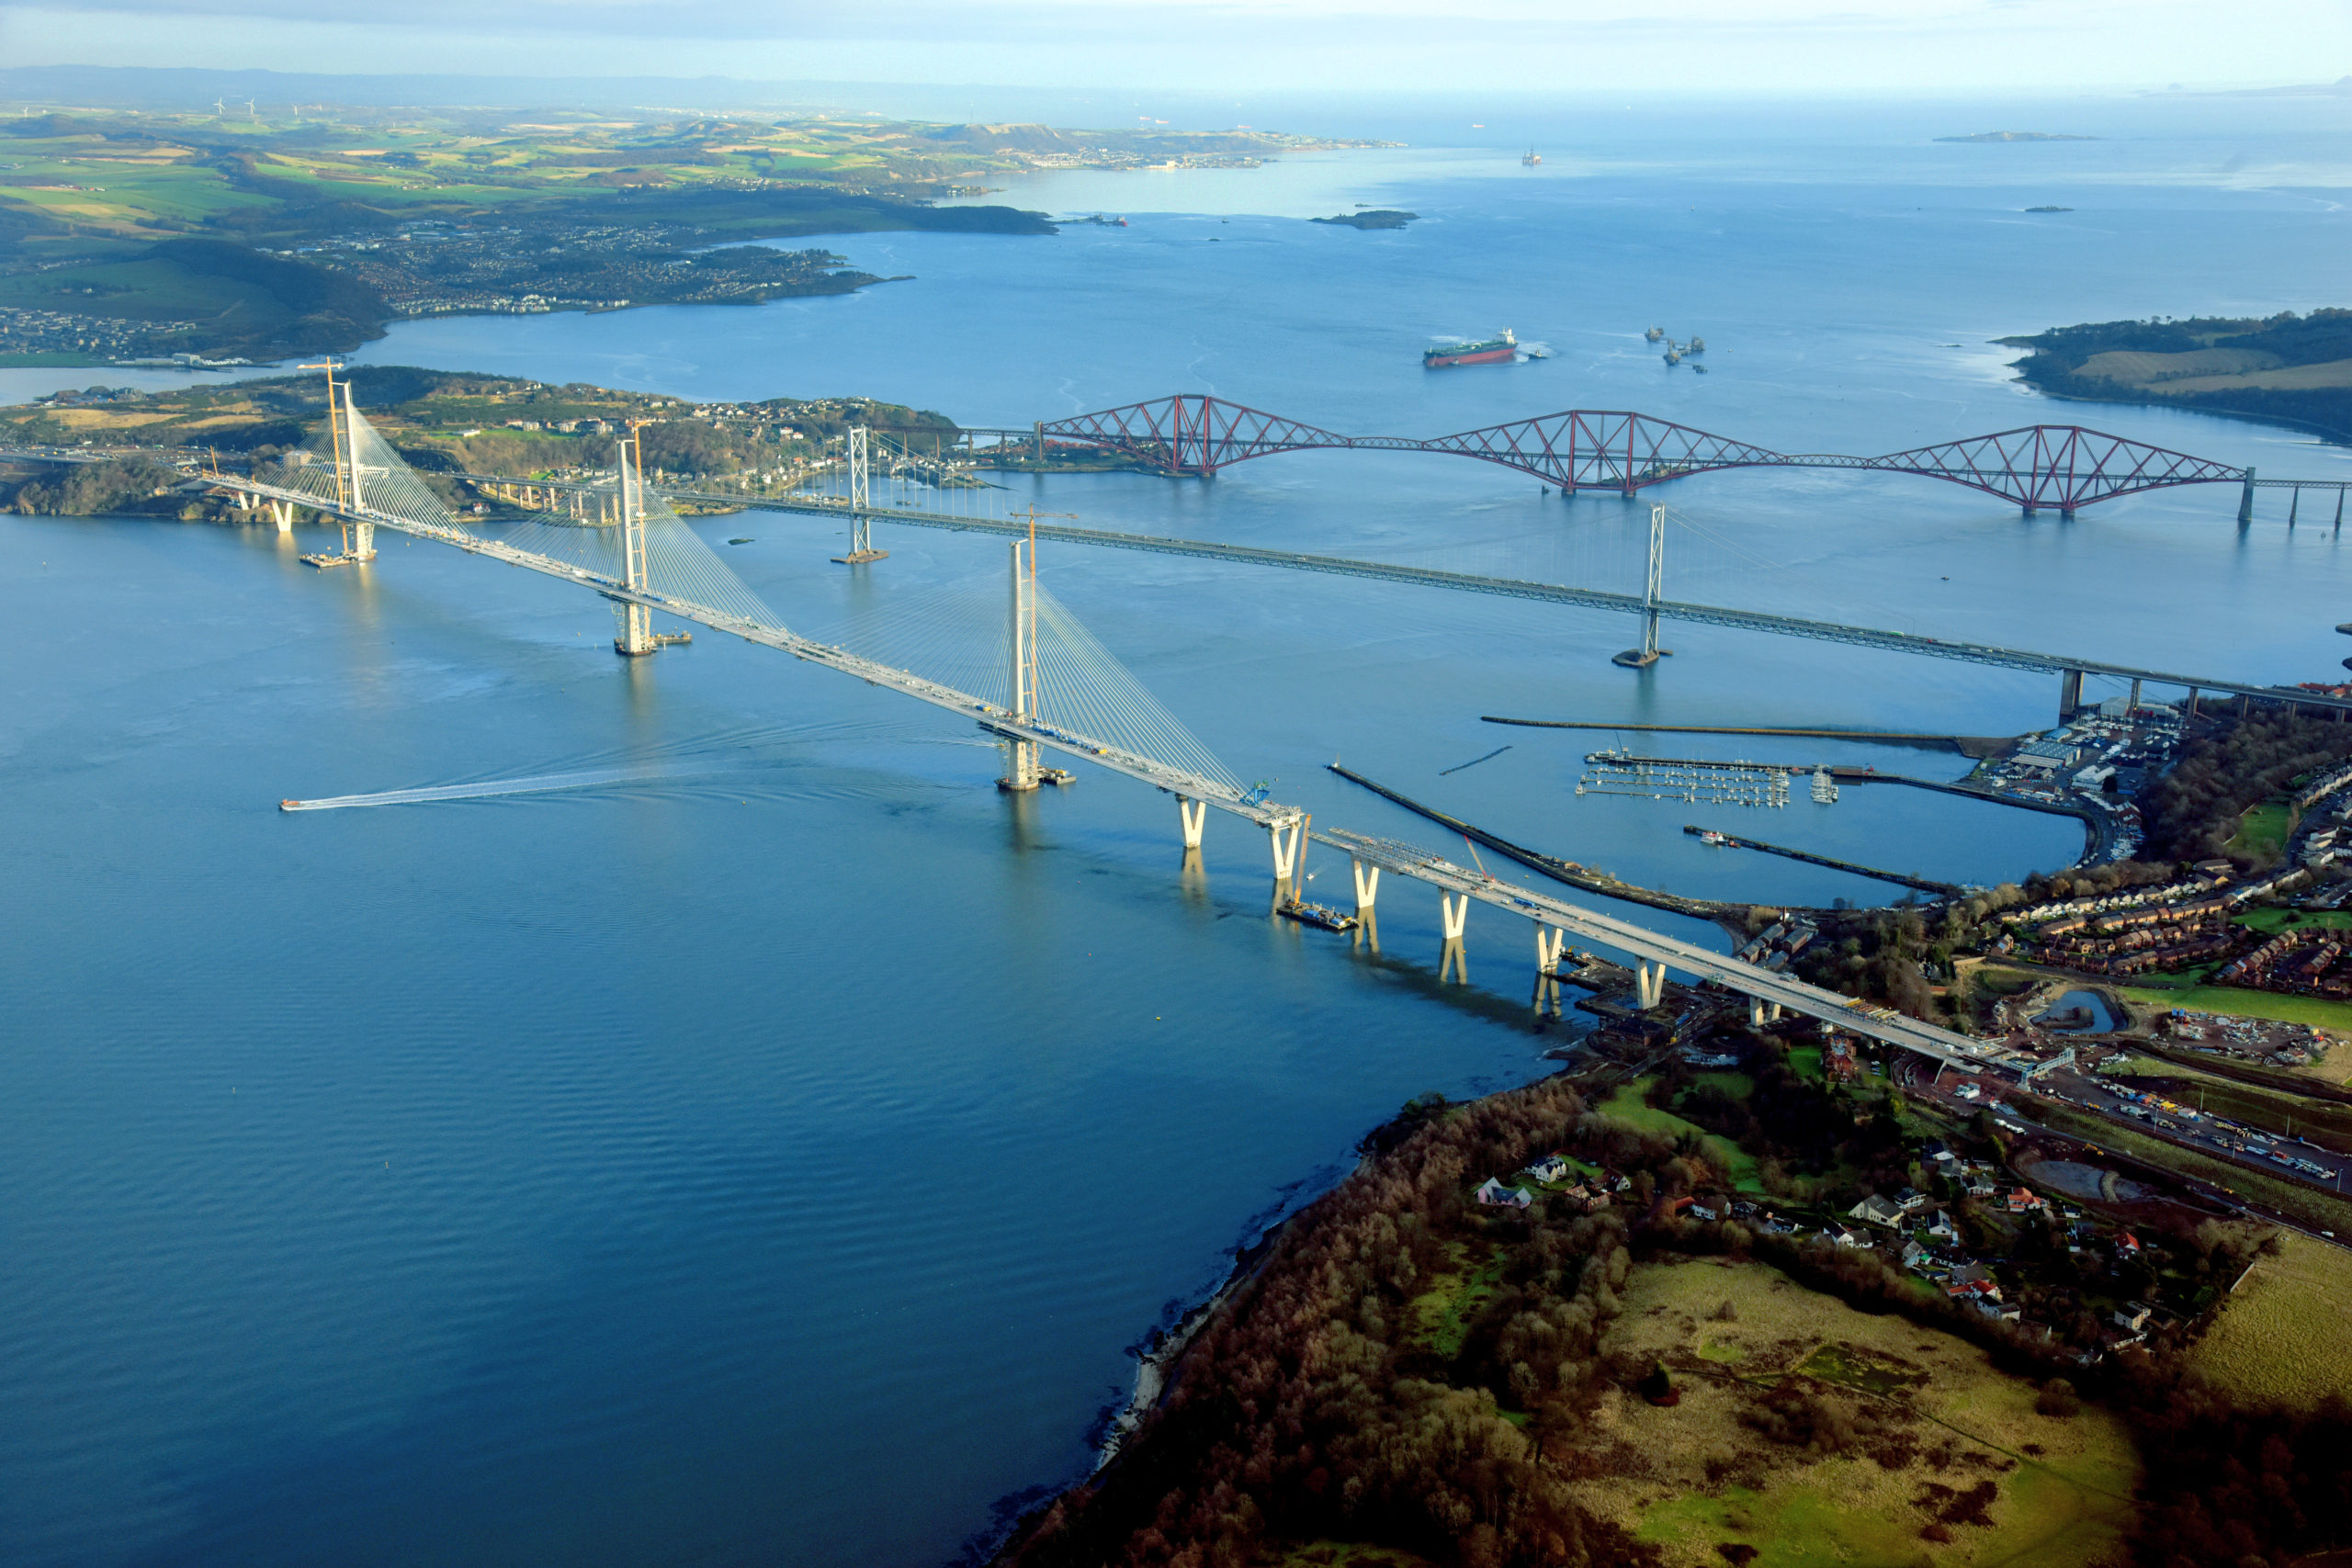 Queensferry Crossing case civil and structural engineering project queensferry crossing